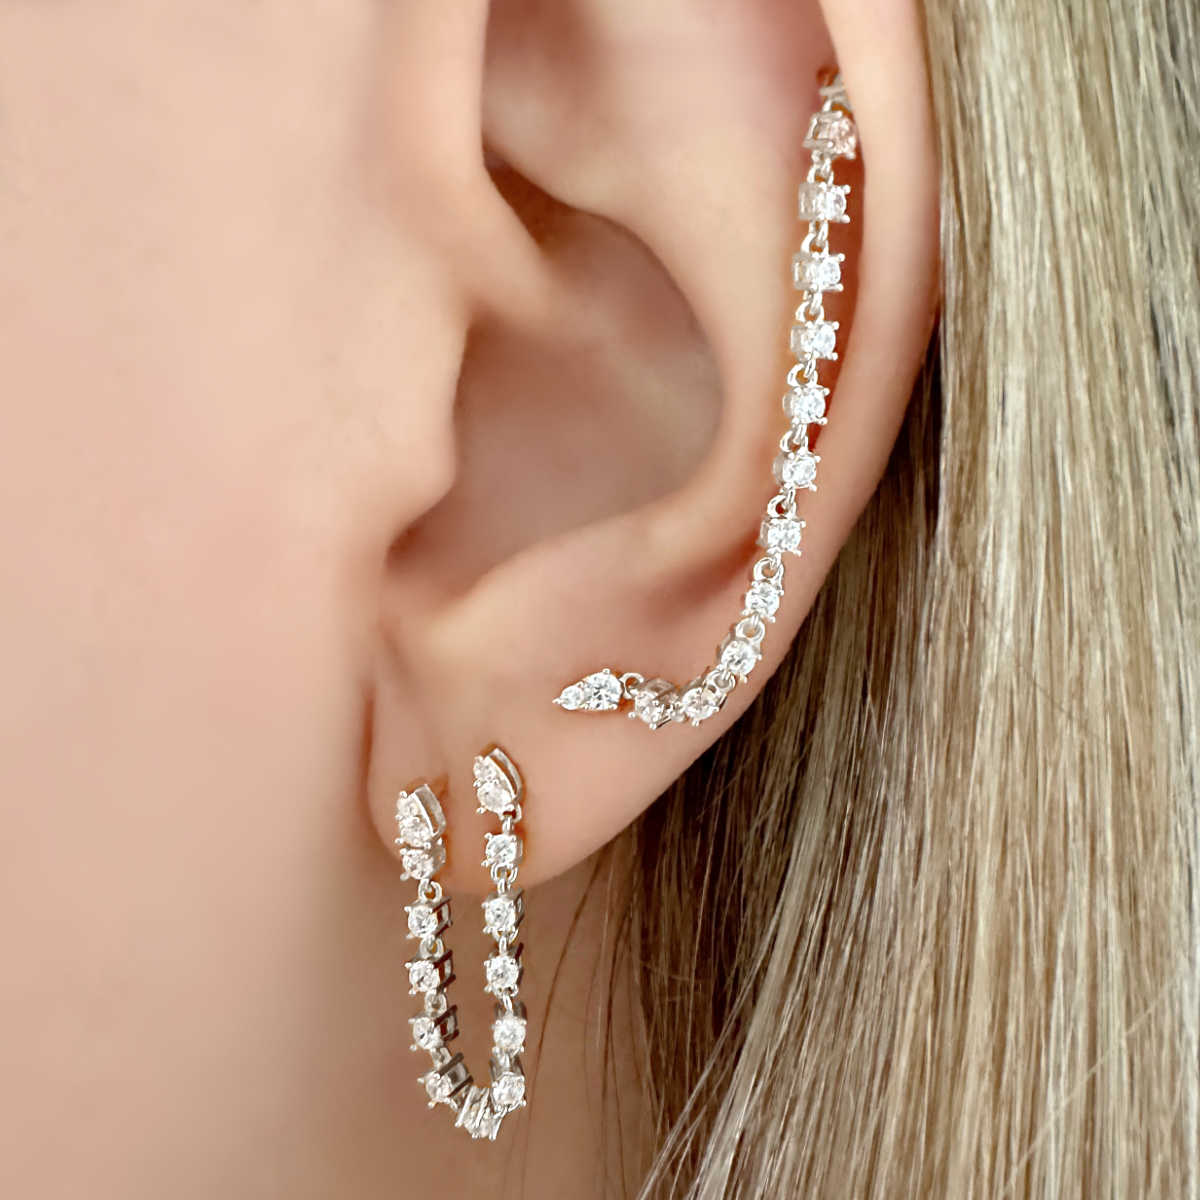 White Gold Tennis Earrings, Connected Chain Double Piercing Studs on Model